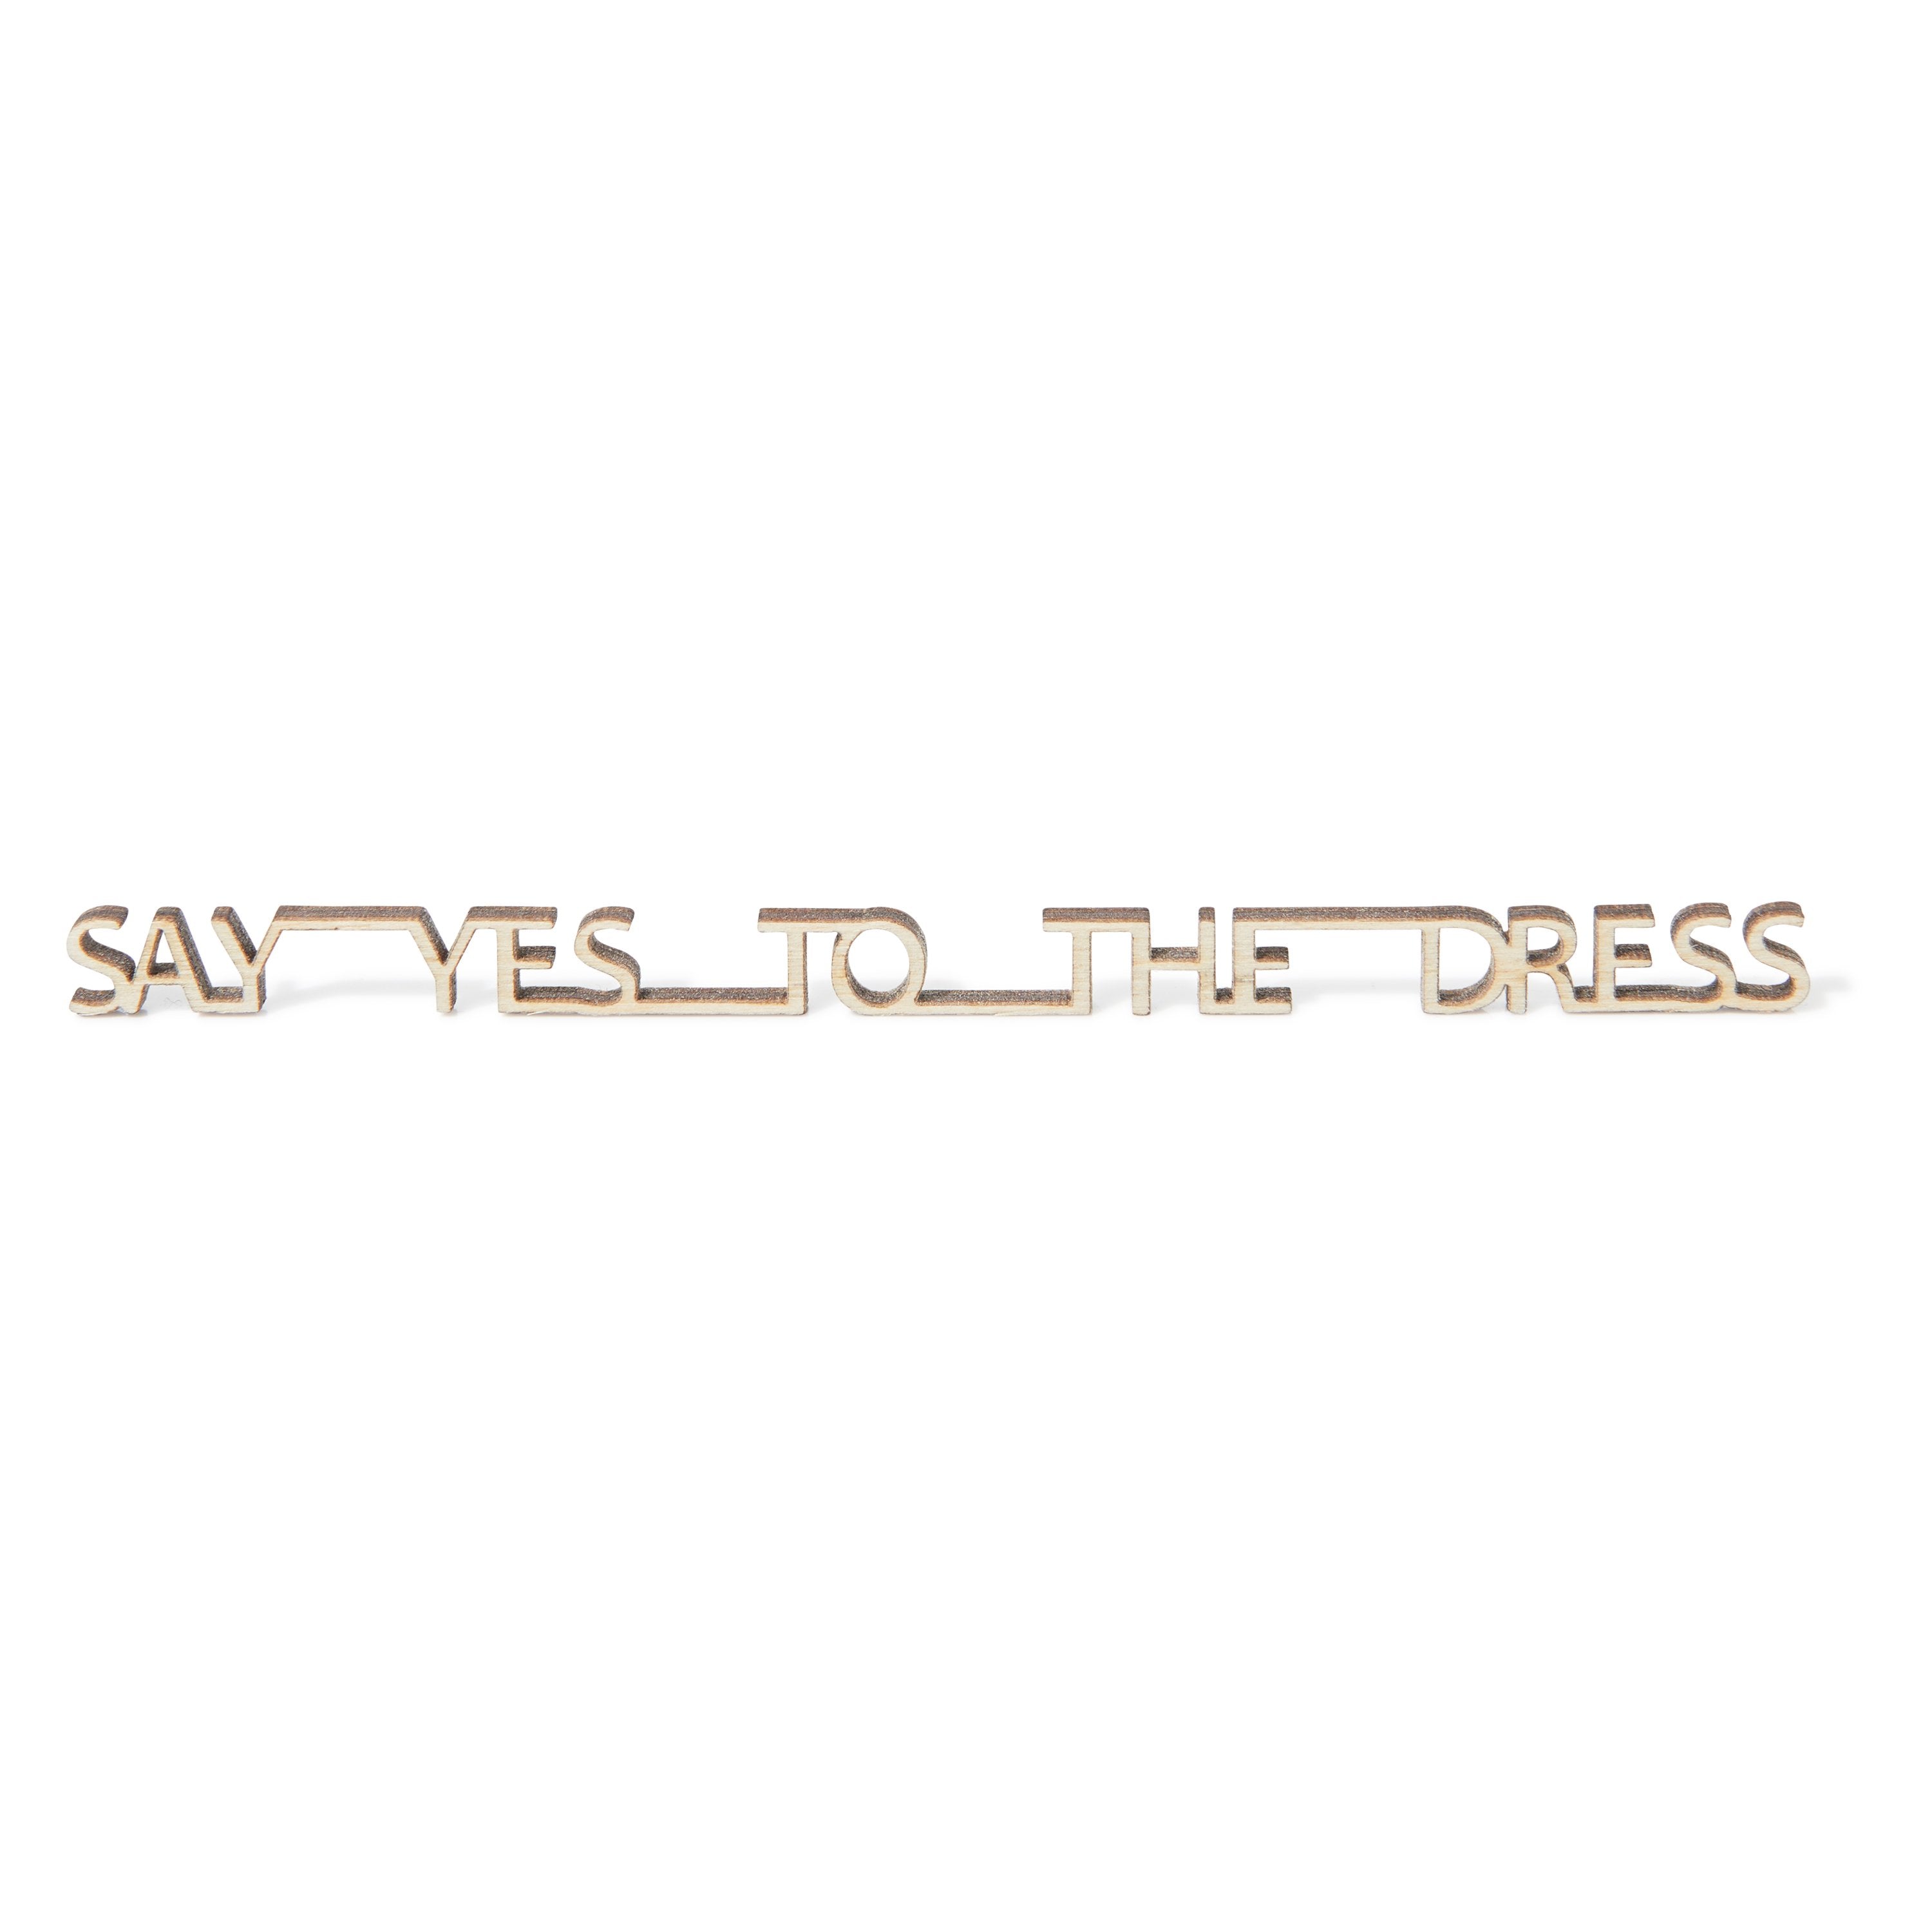 Will you help me say yes to the dress? - Birambi